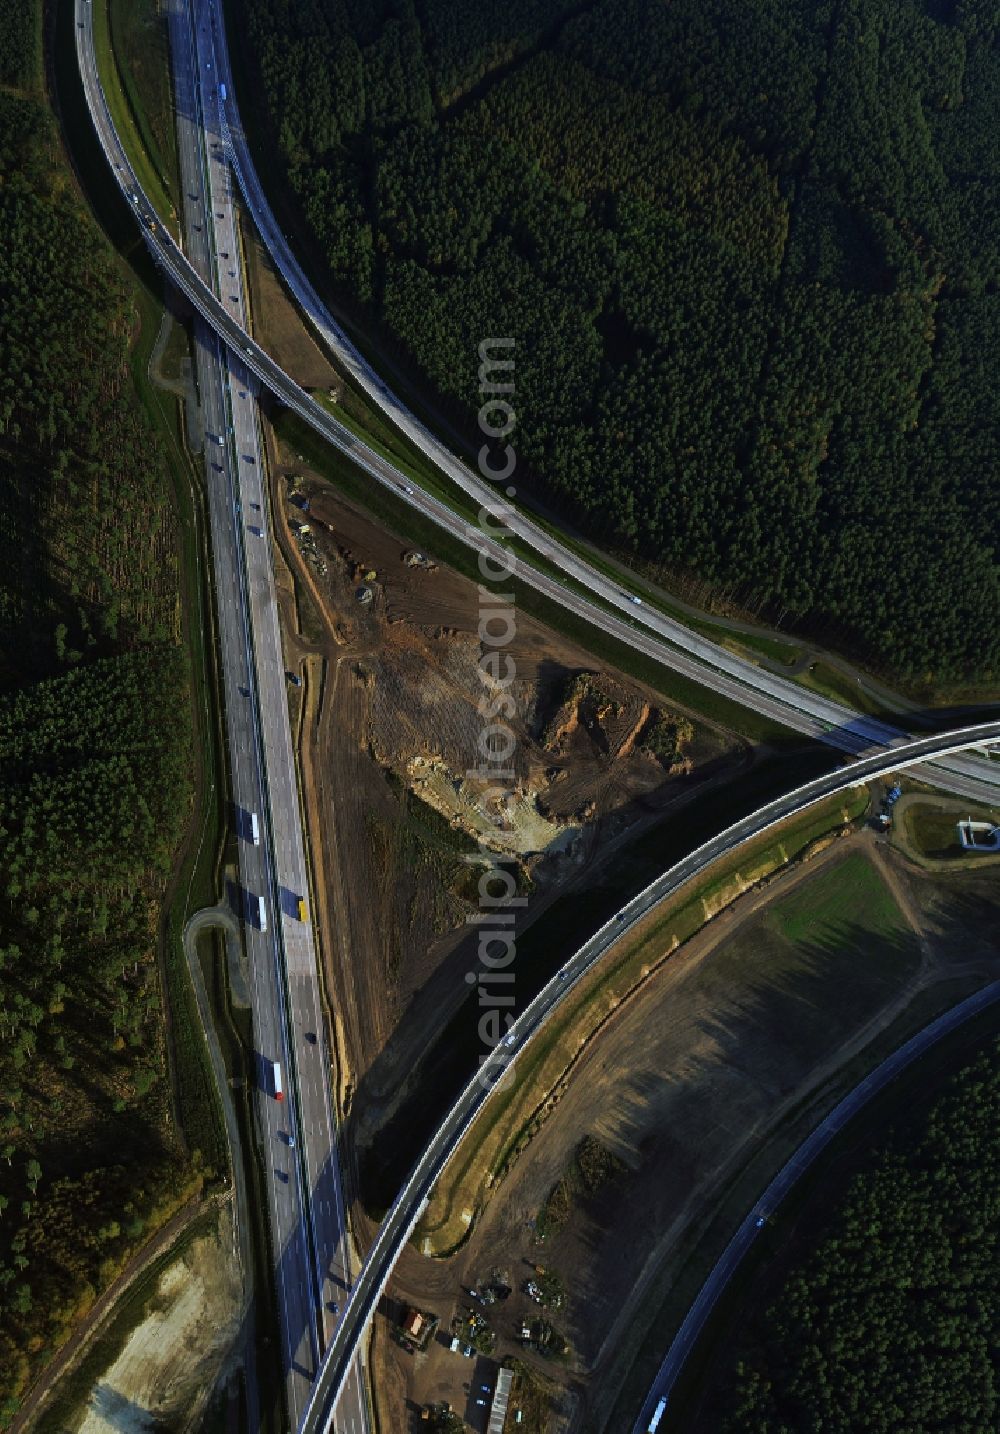 Groß Ziethen from above - Construction site of the junction Havelland at the motorway A10 and A24 in the state Brandenburg